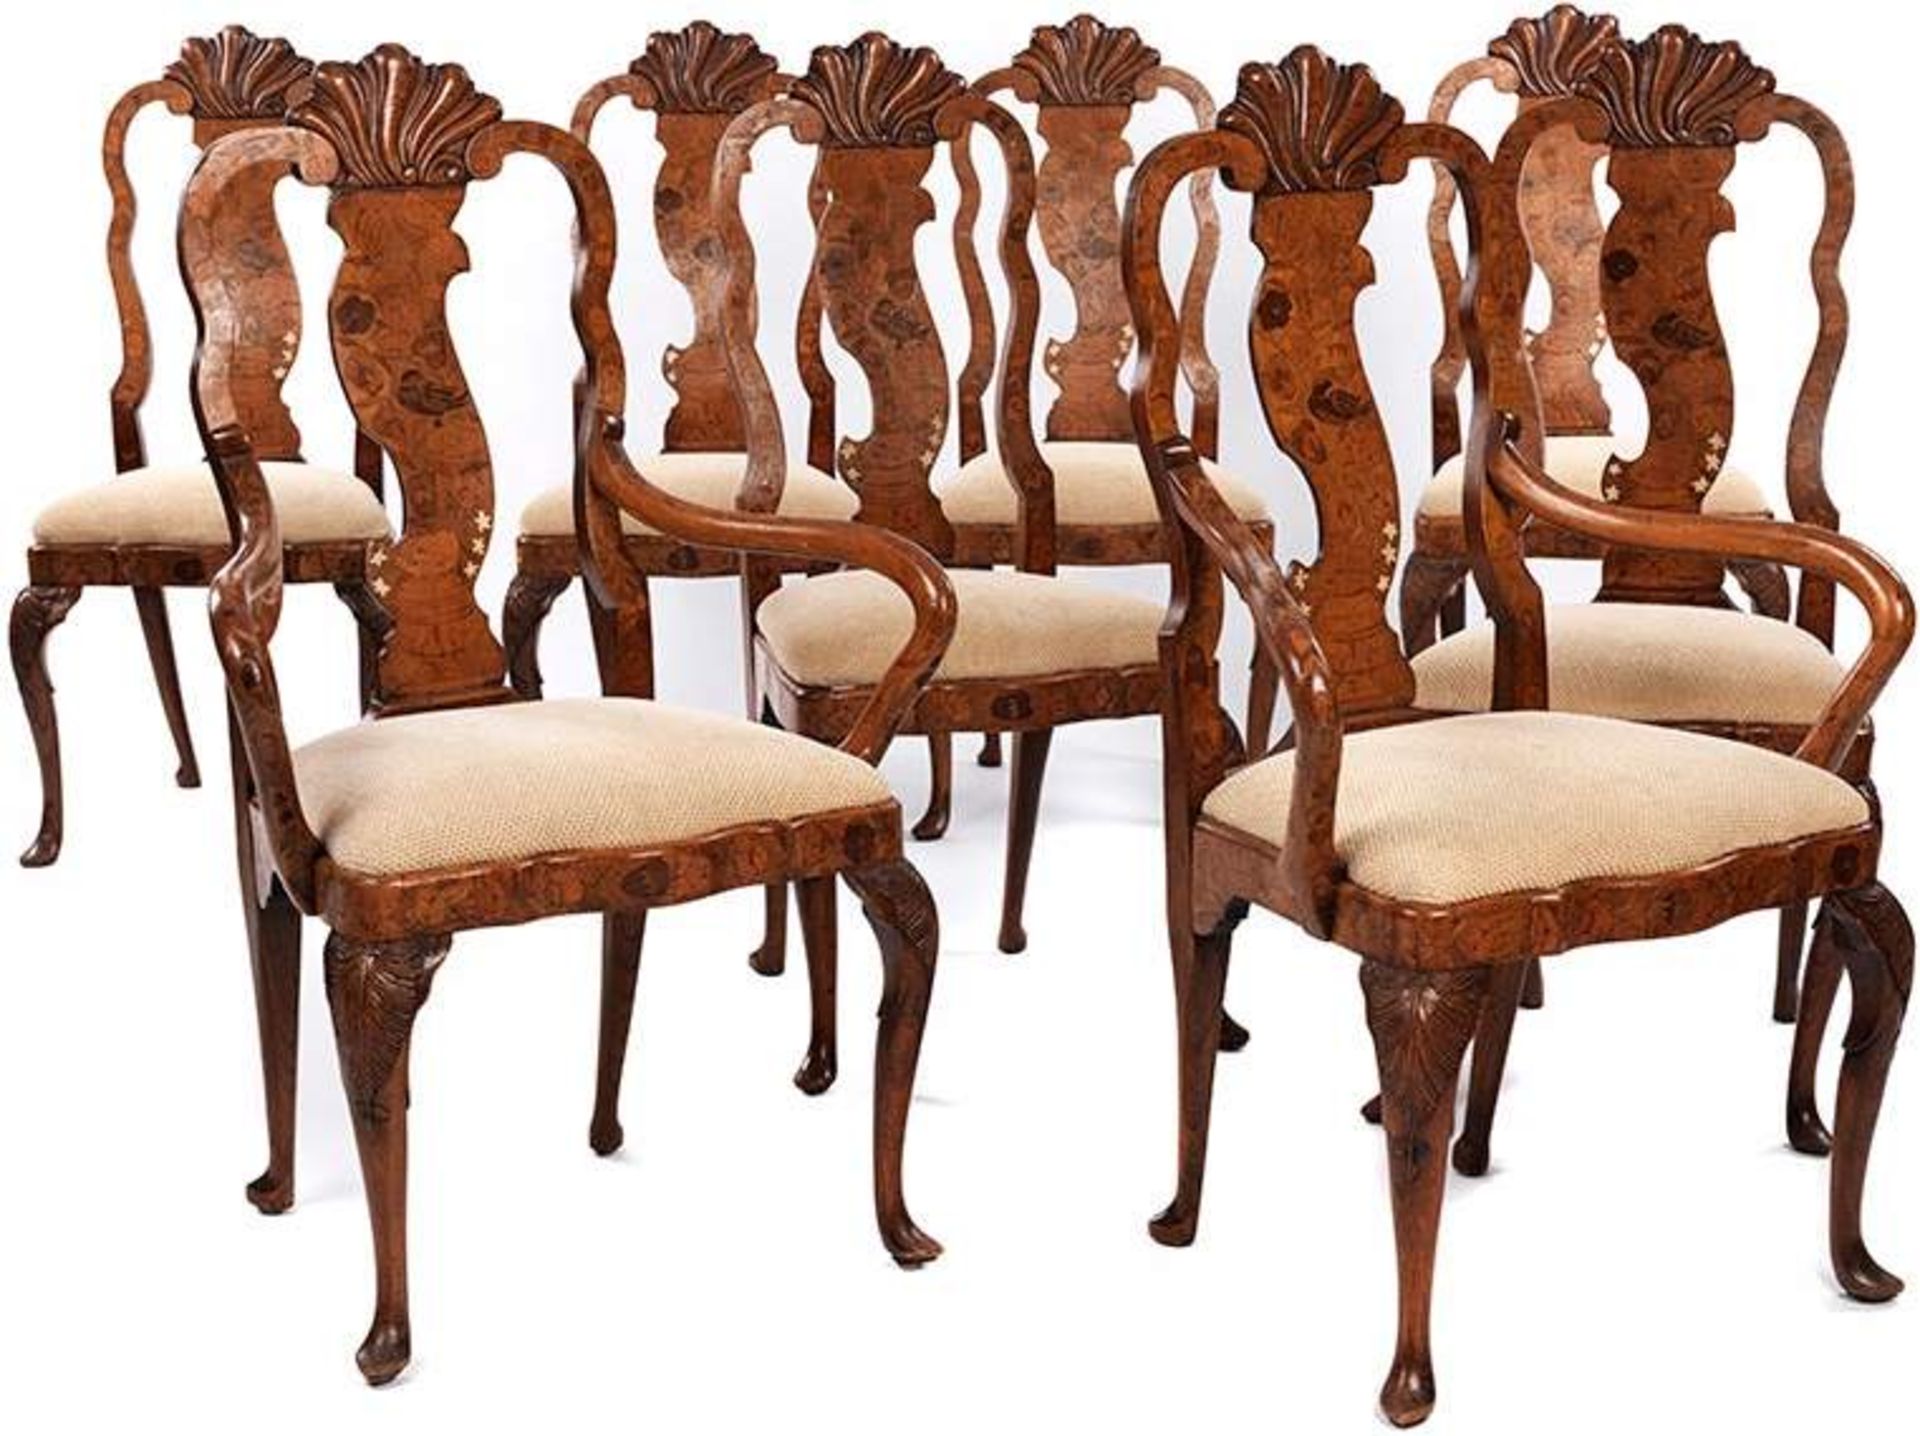 Set of eight Baroque chairs and two armchairsHeight: 114 cm. Width: 53 and 72 cm. Depth: 46 cm.